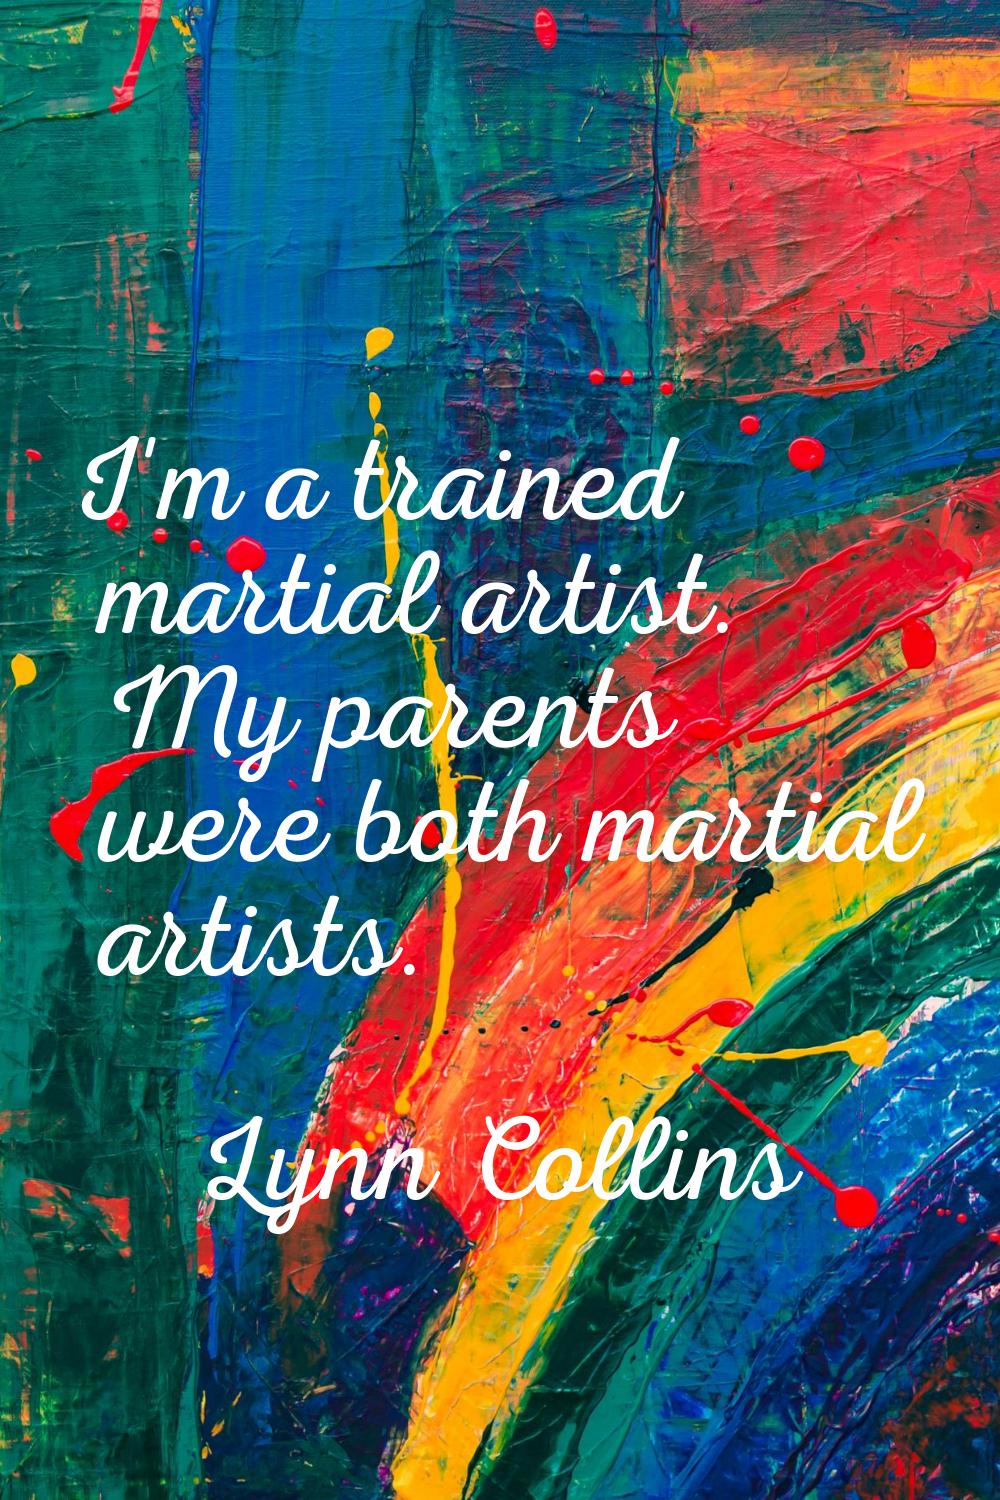 I'm a trained martial artist. My parents were both martial artists.